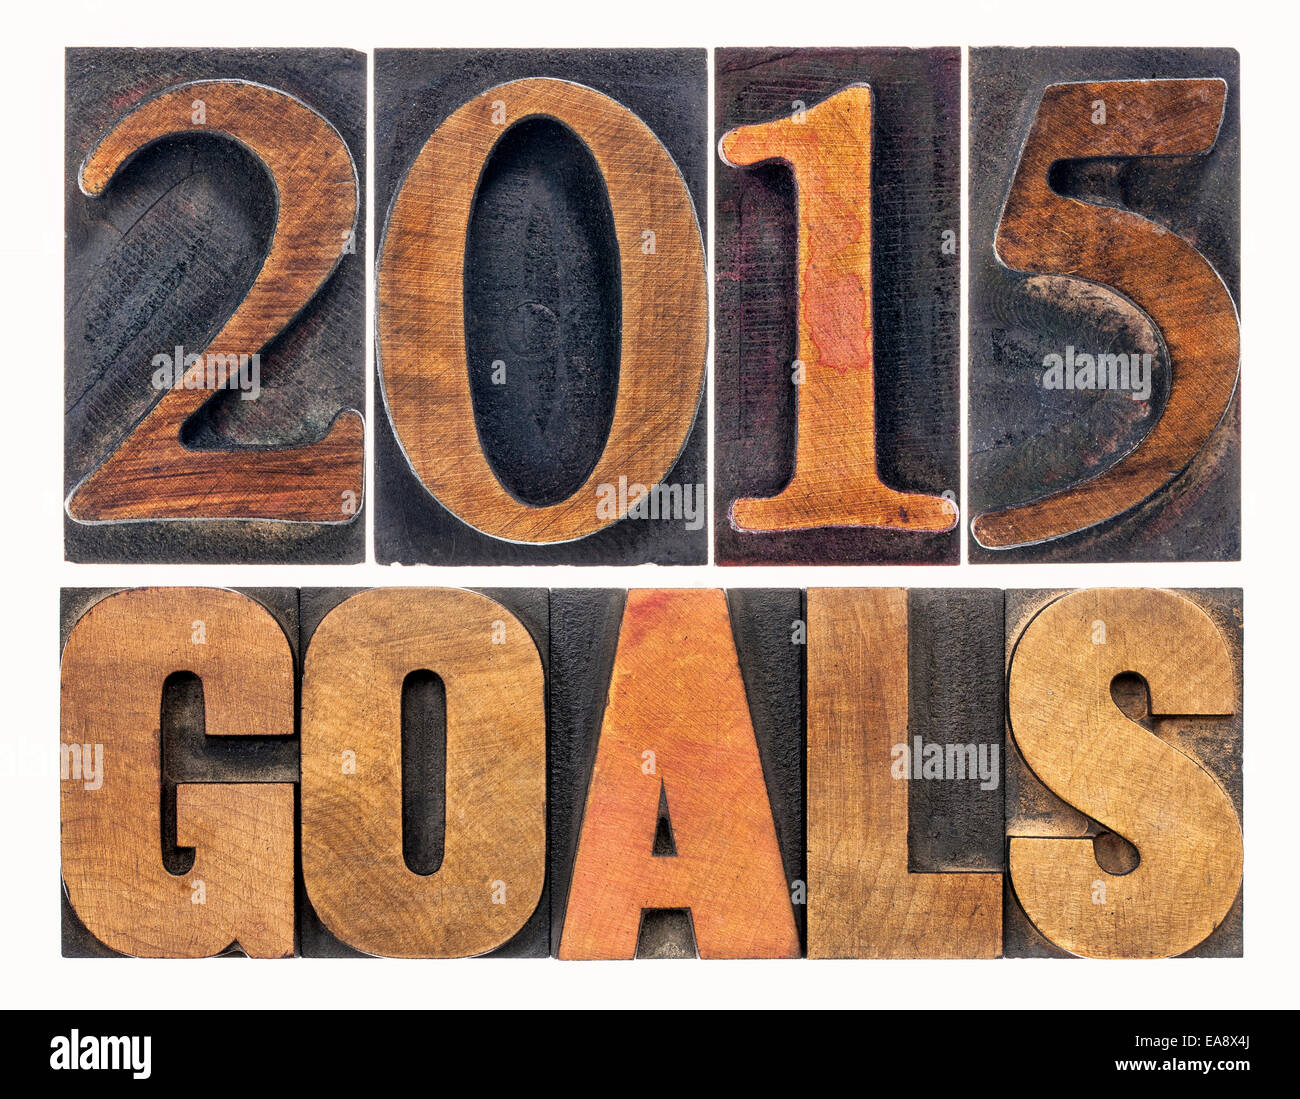 2015 goals - New Year resolution concept - isolated text in vintage letterpress wood type blocks Stock Photo